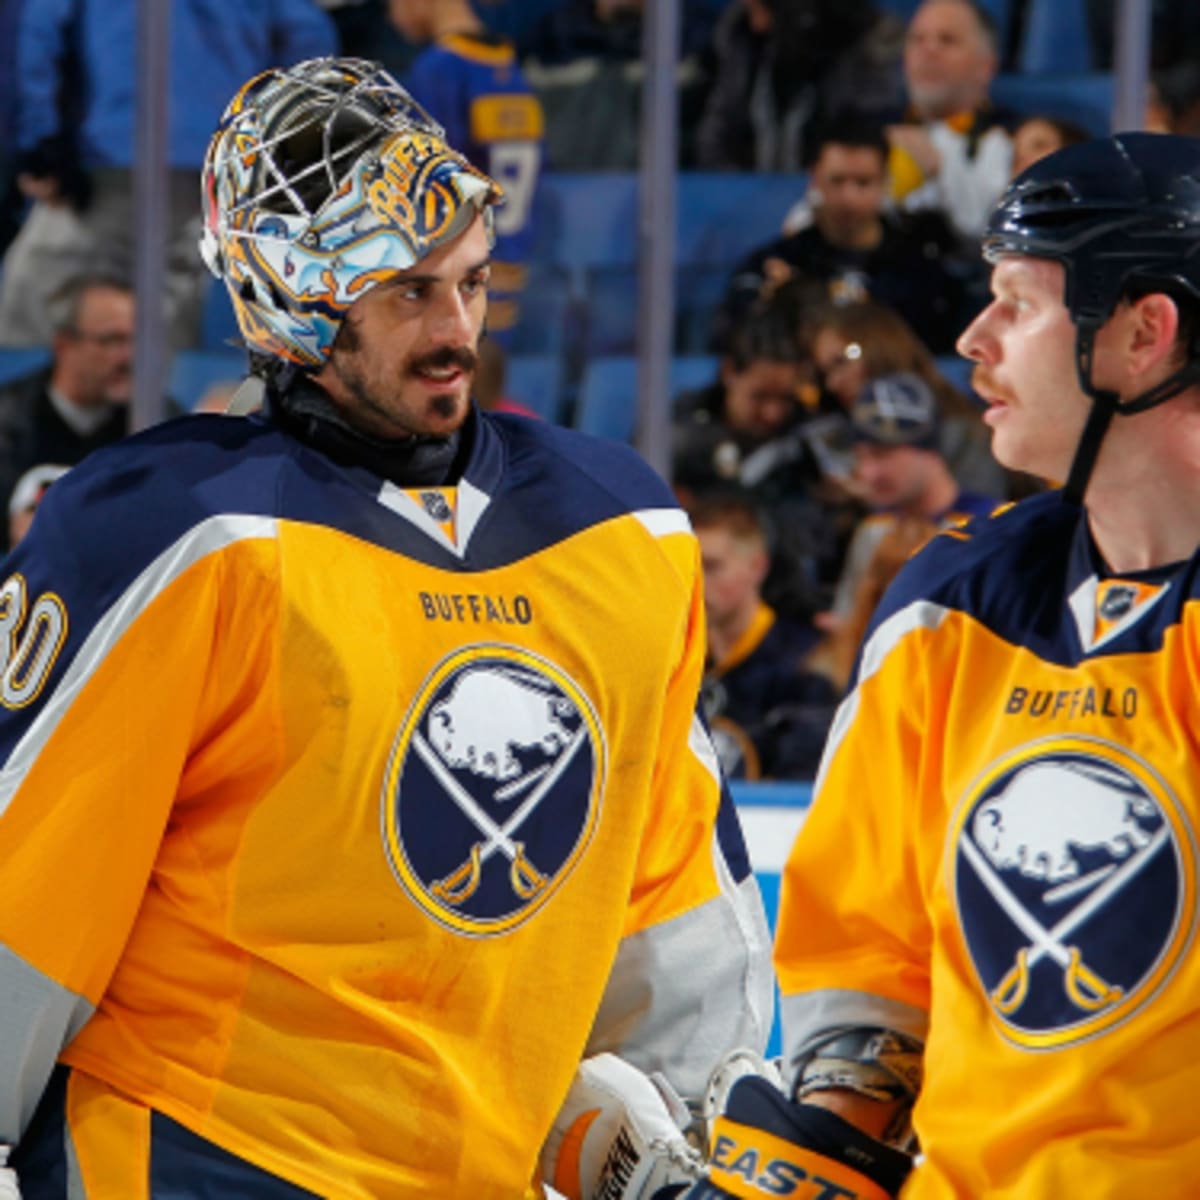 Revisiting the infamous Ryan Miller trade by the St. Louis Blues